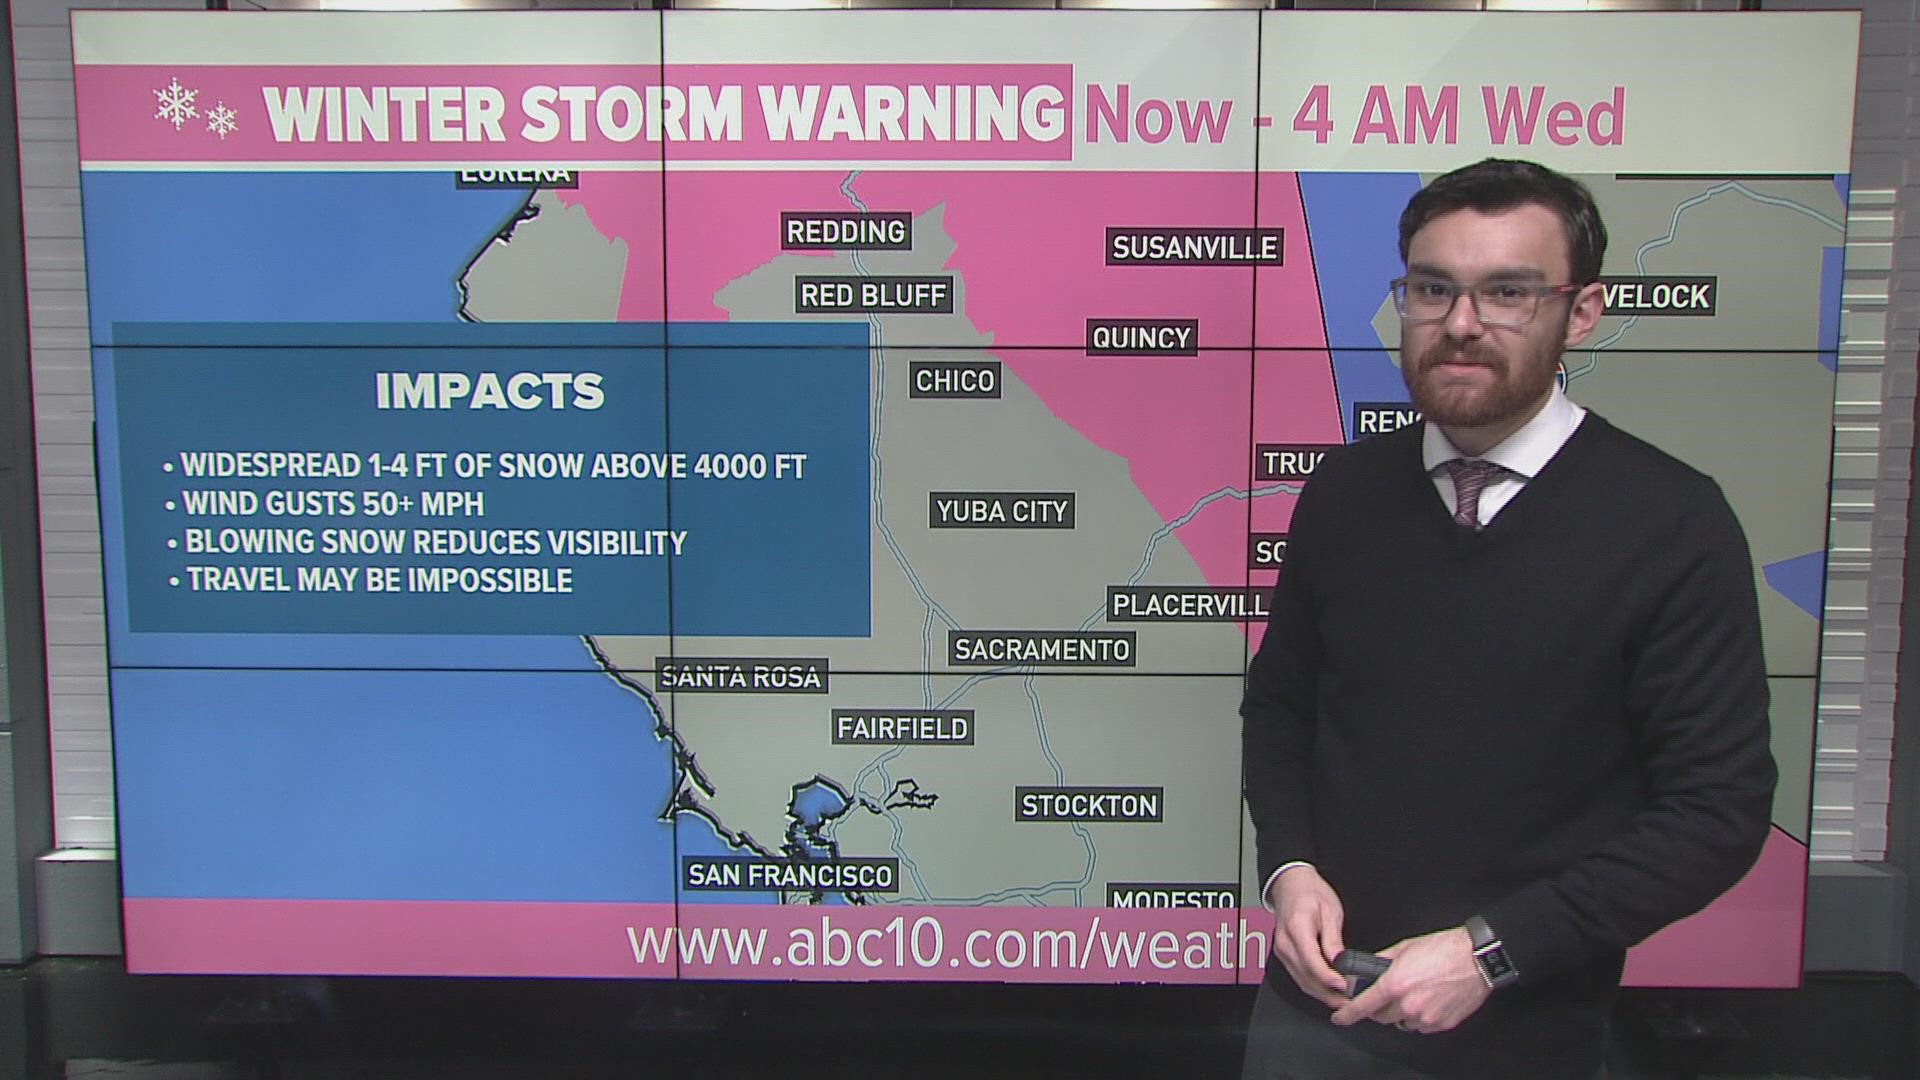 Our first major winter storm of the season enters into Northern California tonight. ABC10 meteorologist Brenden Mincheff has the latest on your Monday A.M. commute.